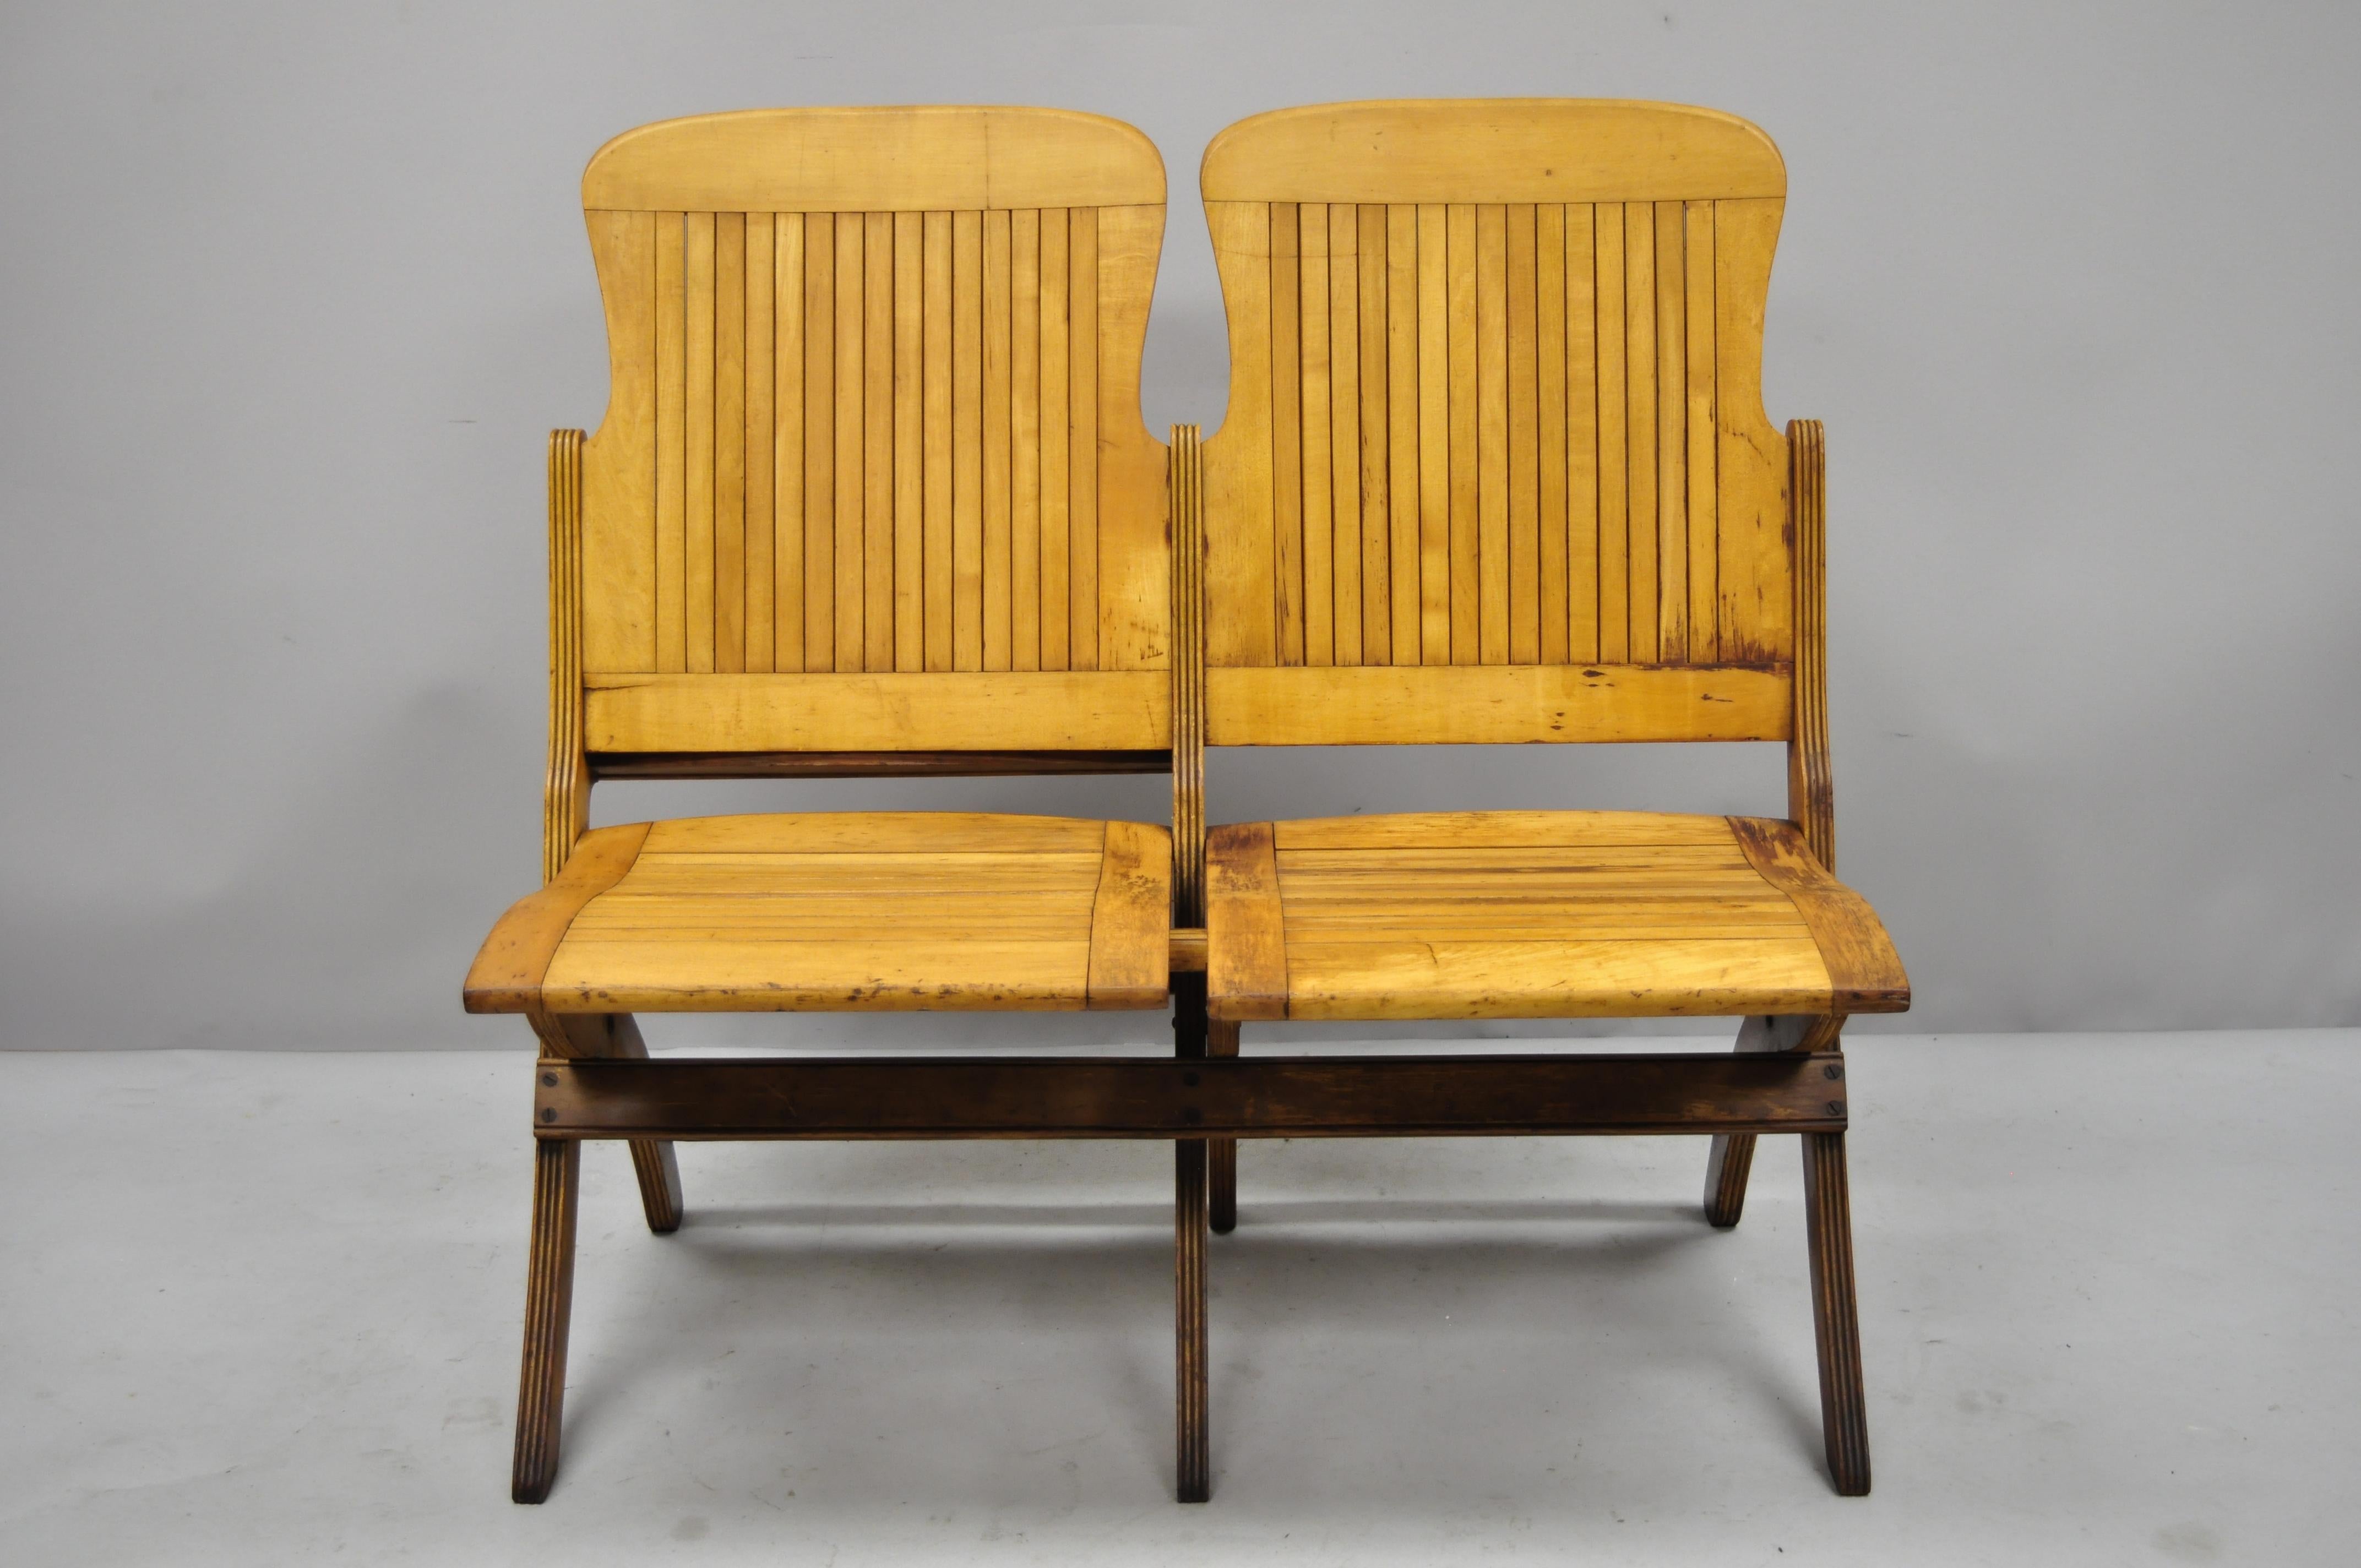 Antique Vintage Wood Slat Double Folding Seat Theater School Old Pew Chair 3